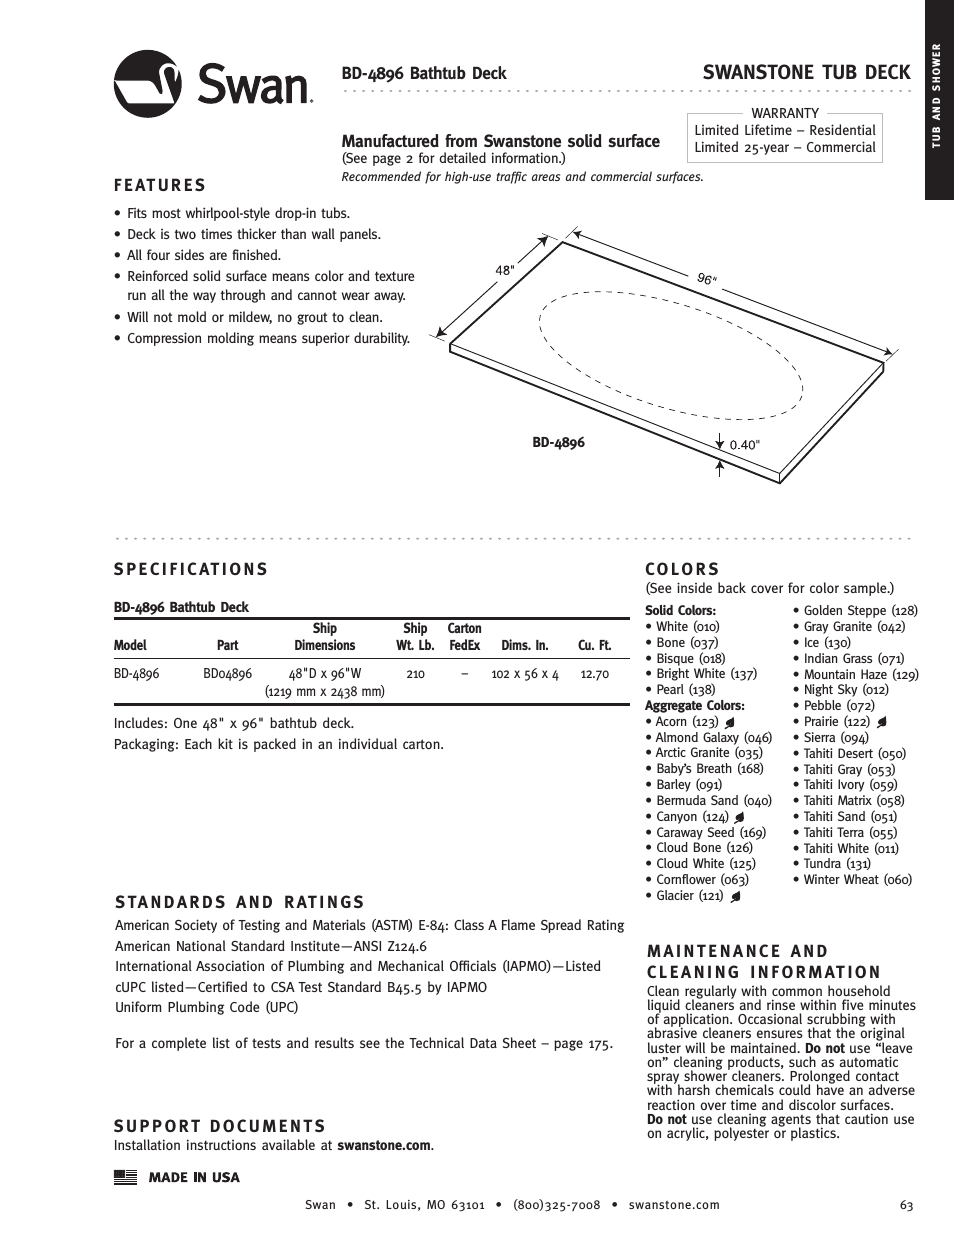 BD-4896 - Specification